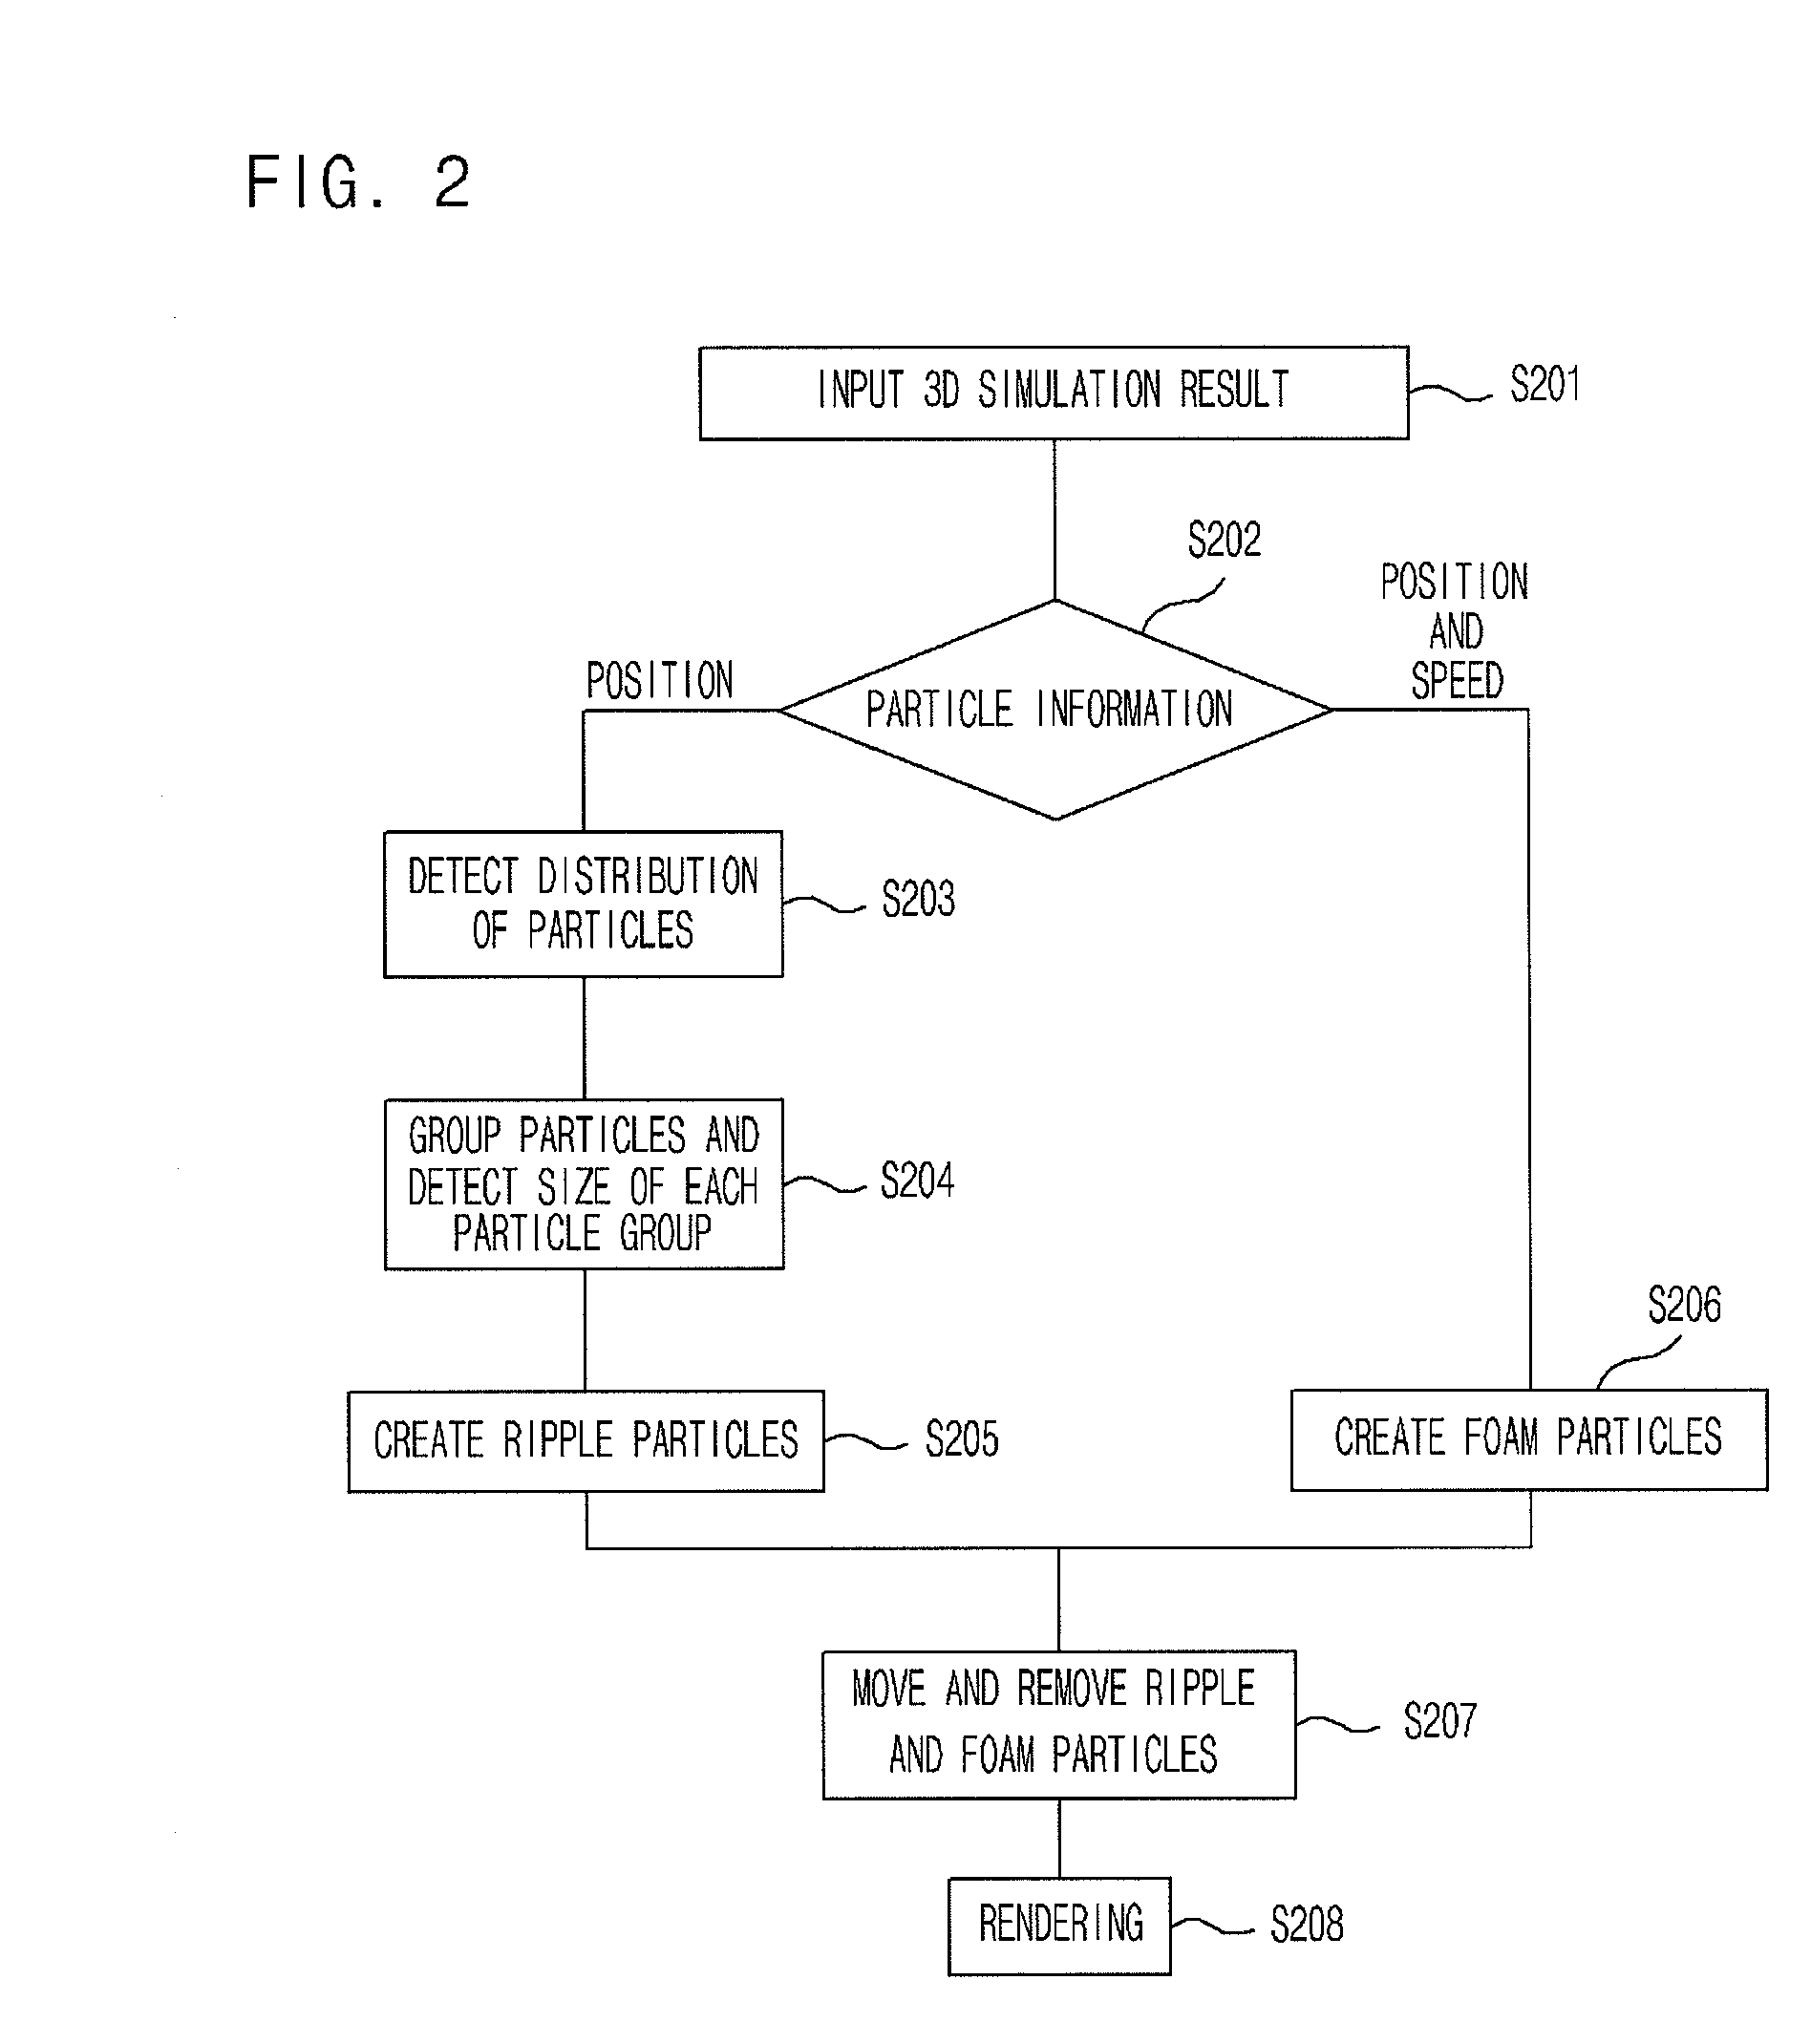 Ripple and foam creation apparatus and method using fluid particle data